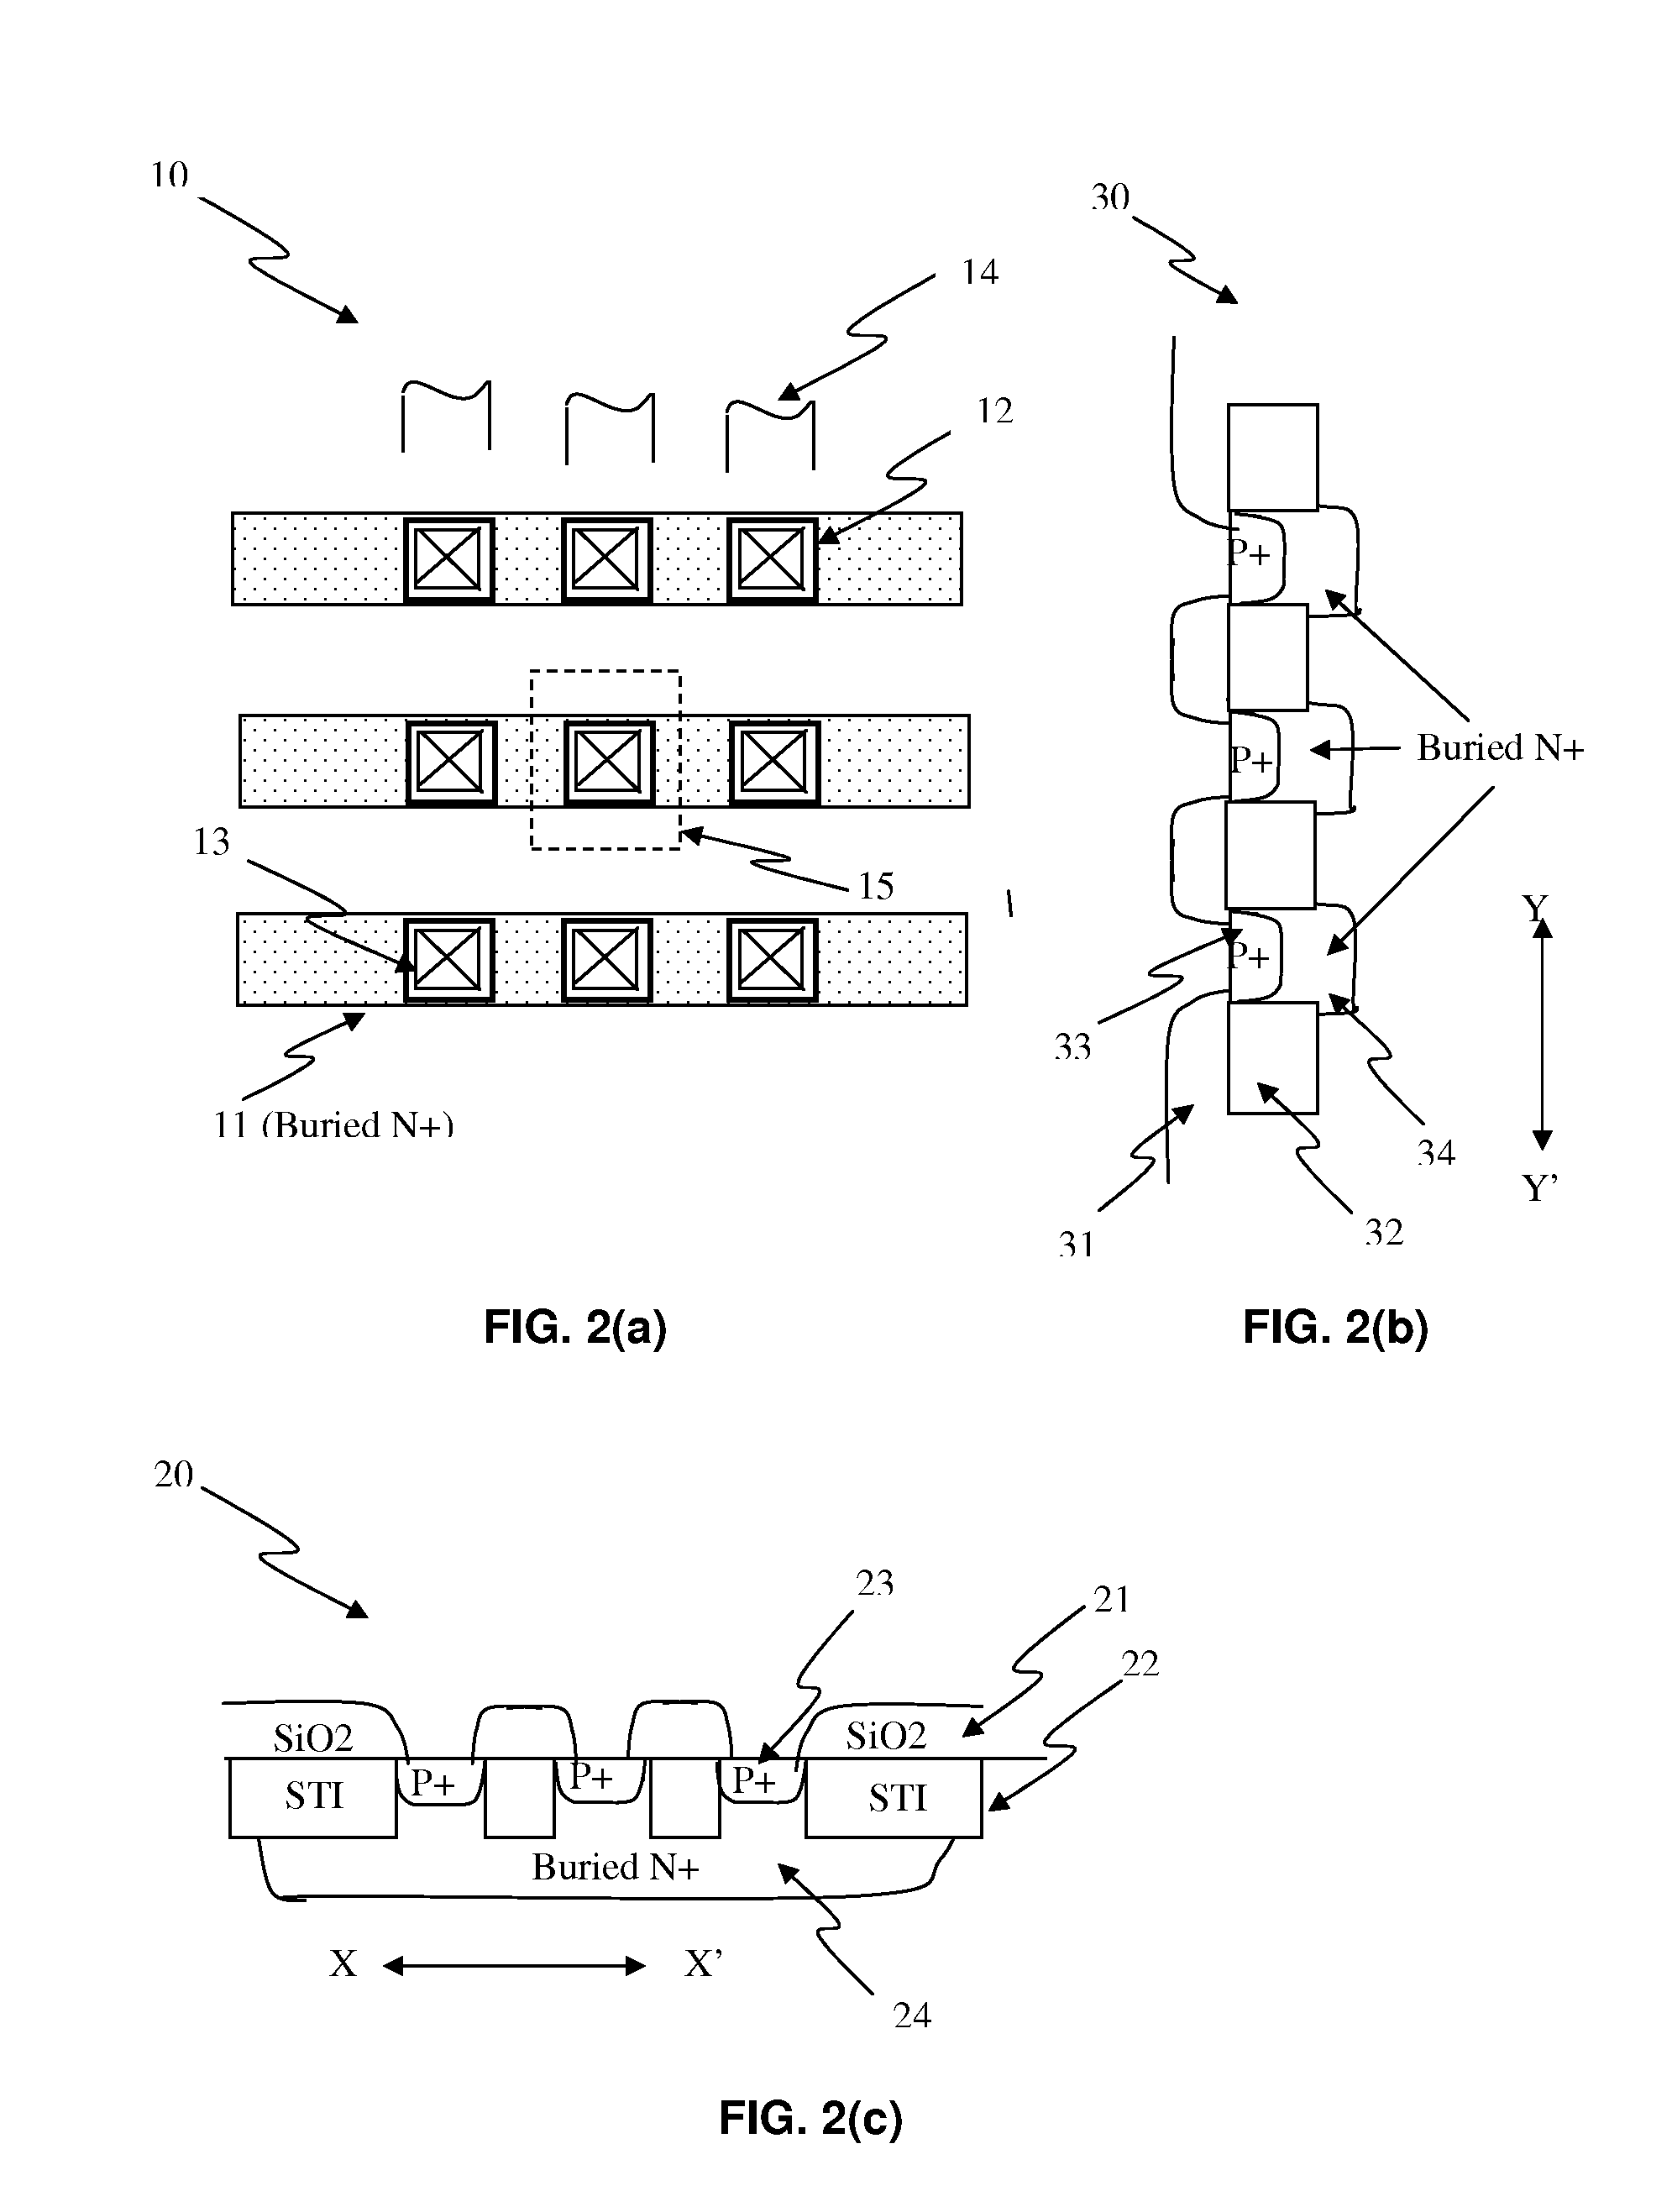 Circuit and system of a high density Anti-fuse